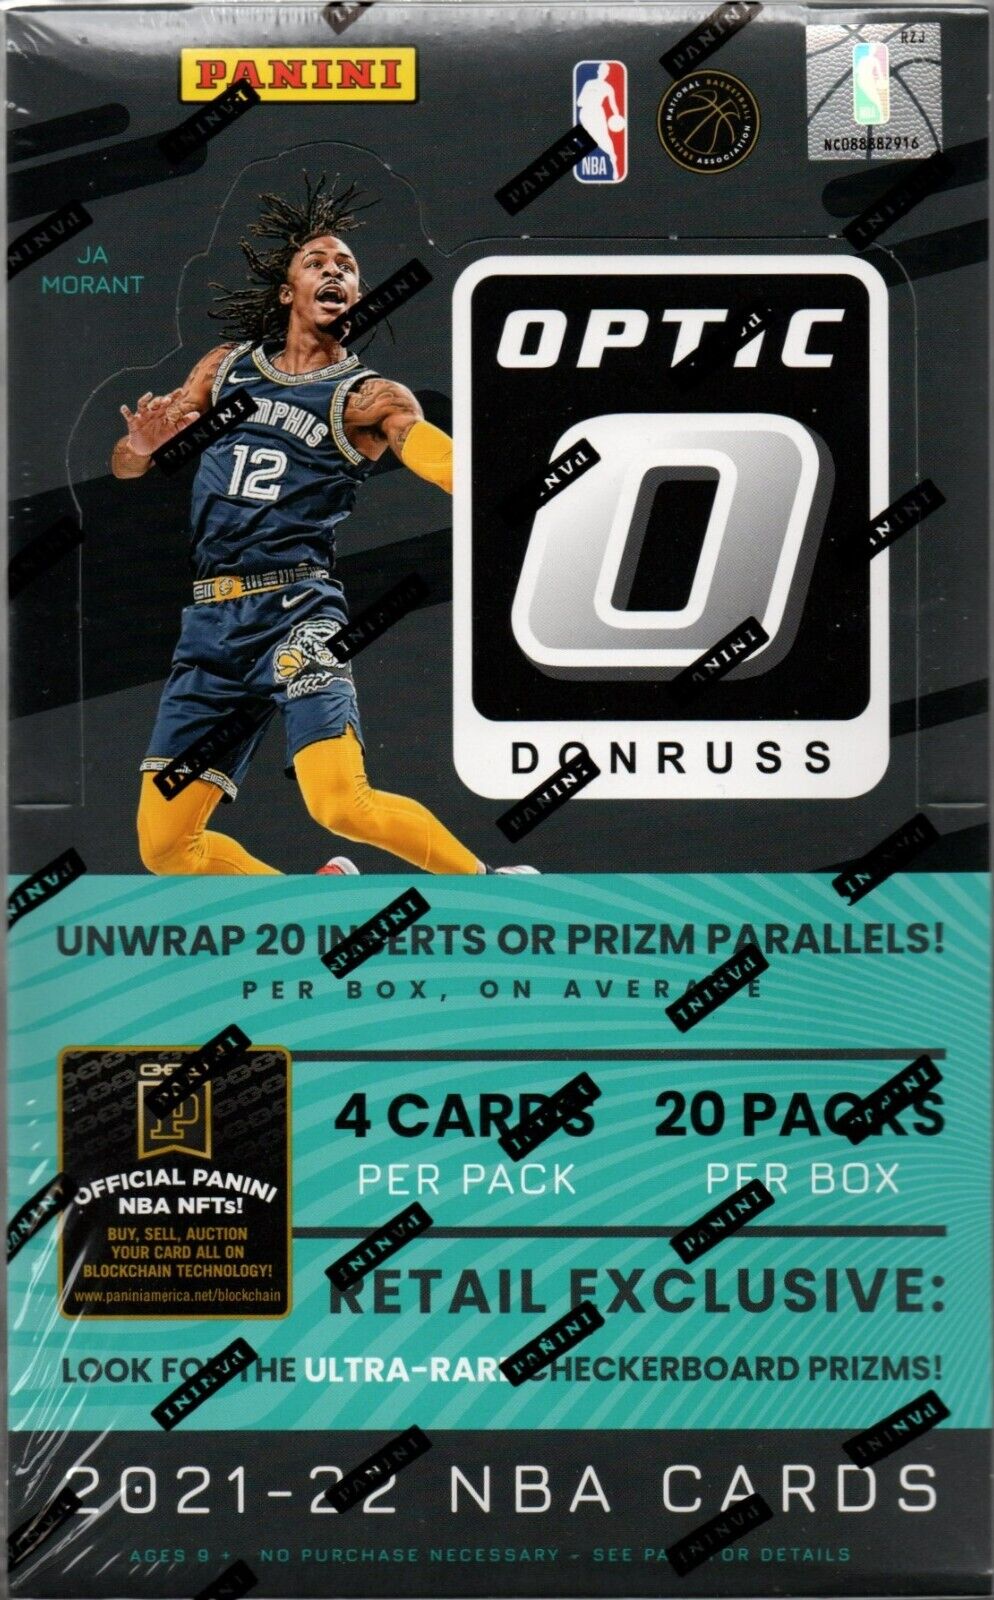 2021 2022 Donruss OPTIC NBA Basketball Retail 20 Pack Box with PRIZM Parallels